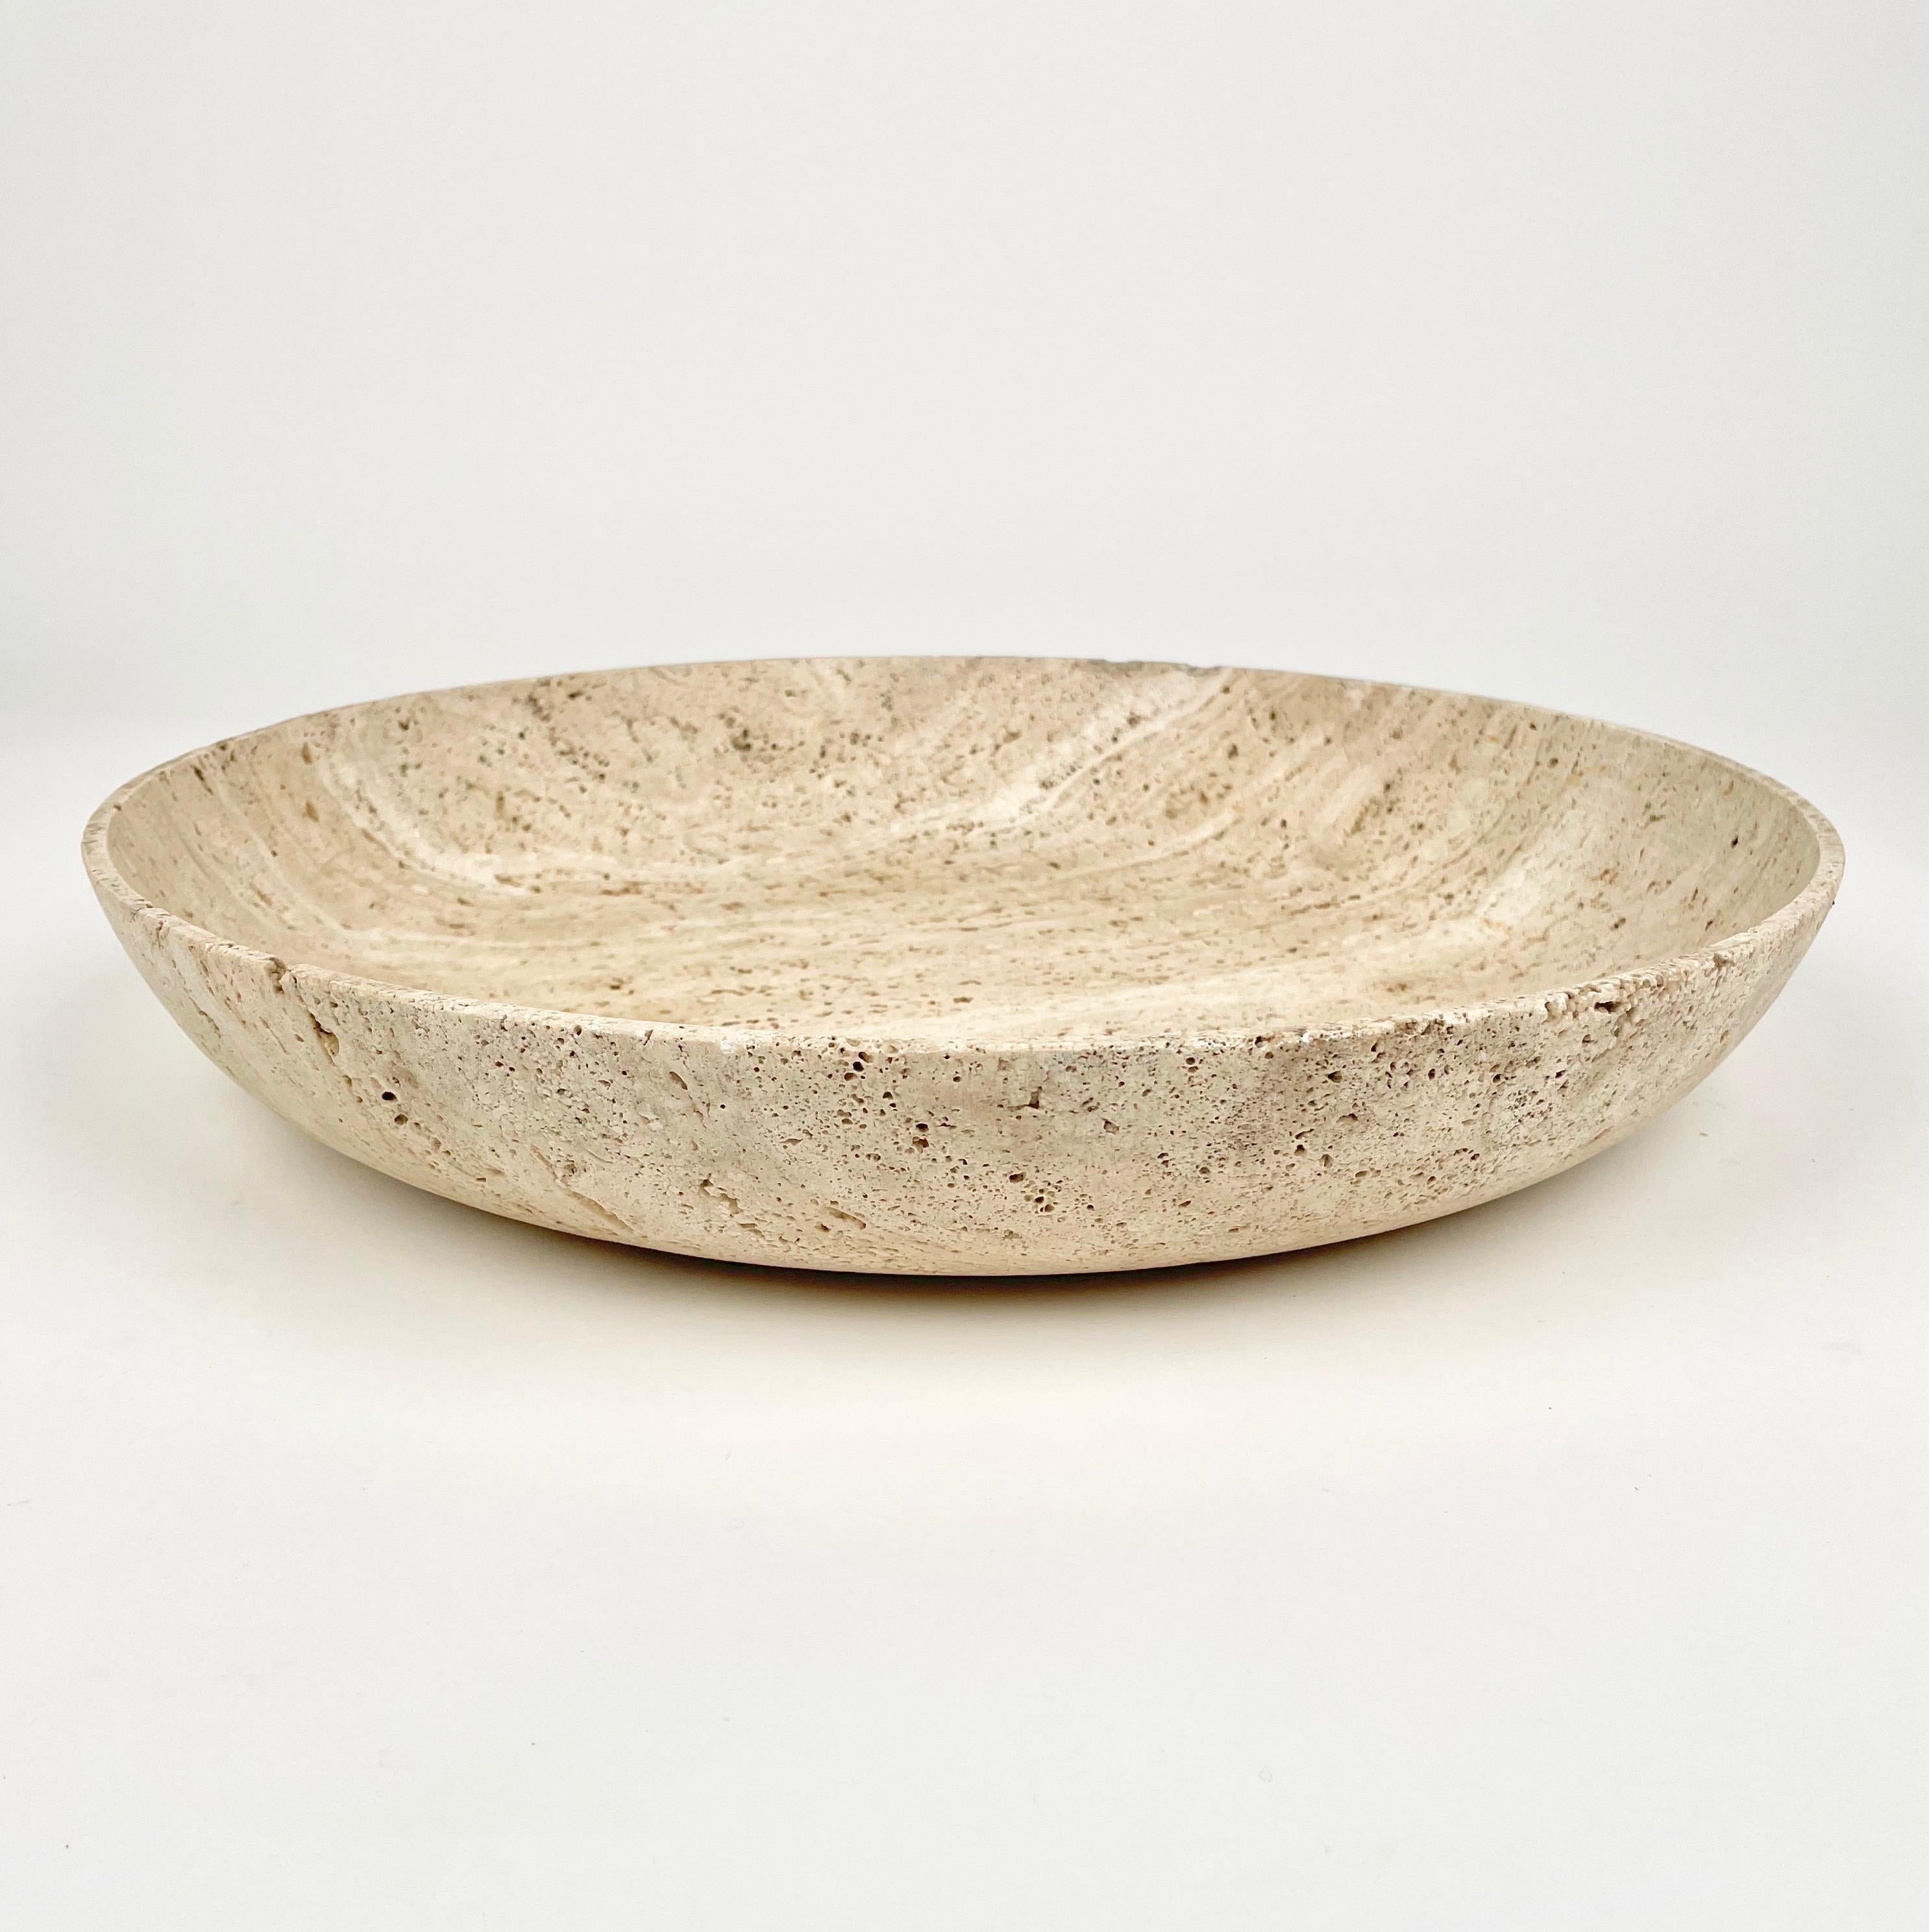 A massive / monumental solid travertine round centrepiece bowl attributed to Pier Alessandro Giusti and Egidio Di Rosa for Up & Up, Italy, circa 1970s.